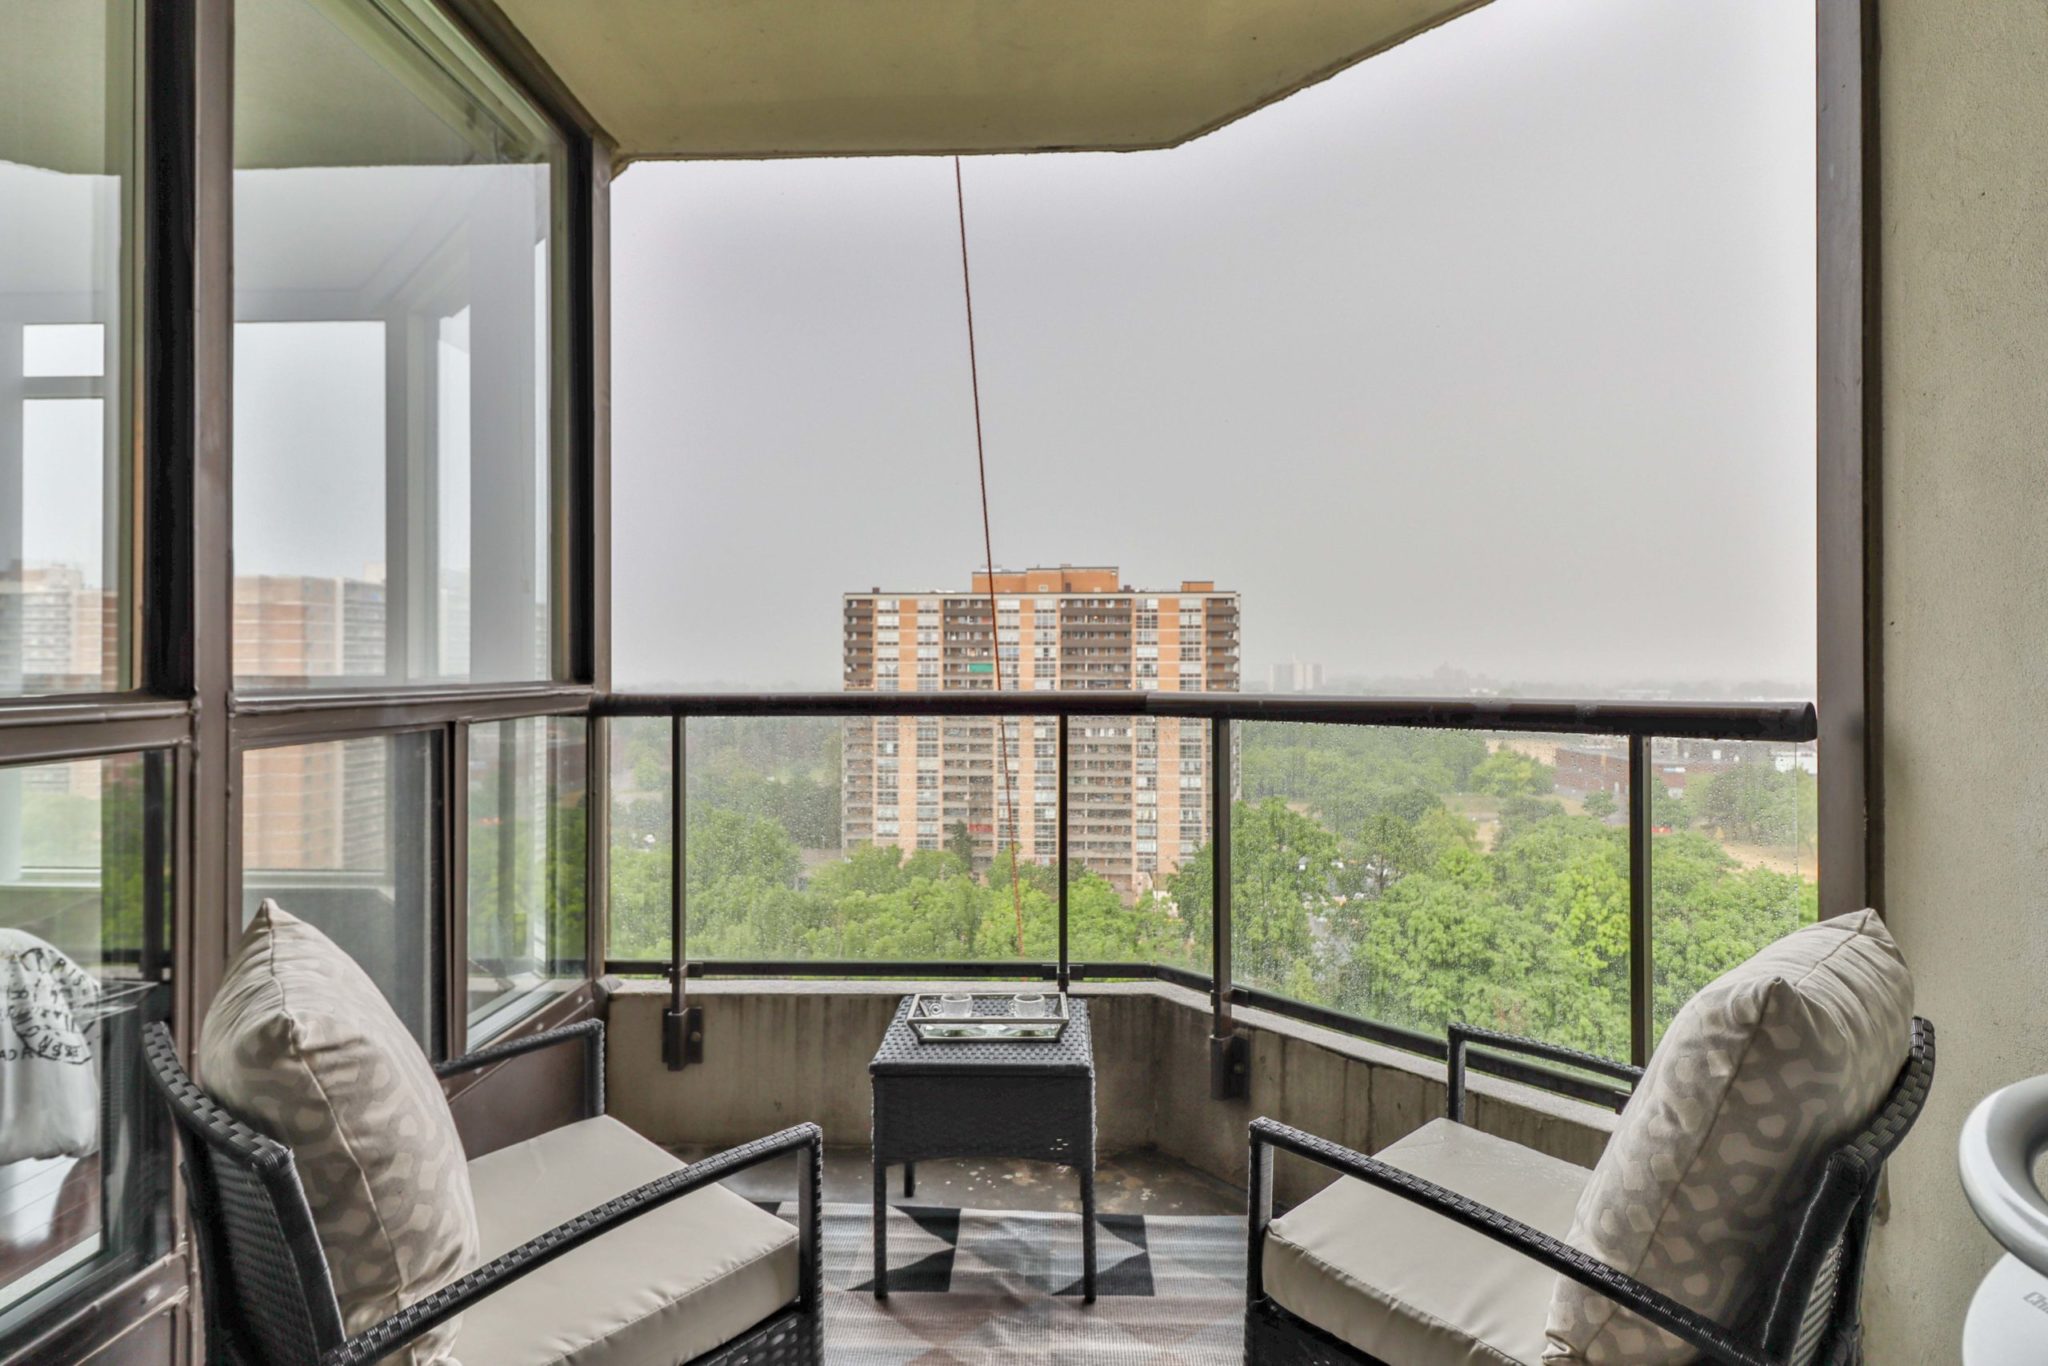 Condo balcony with concrete walls, glass panels, 2 chairs, table.